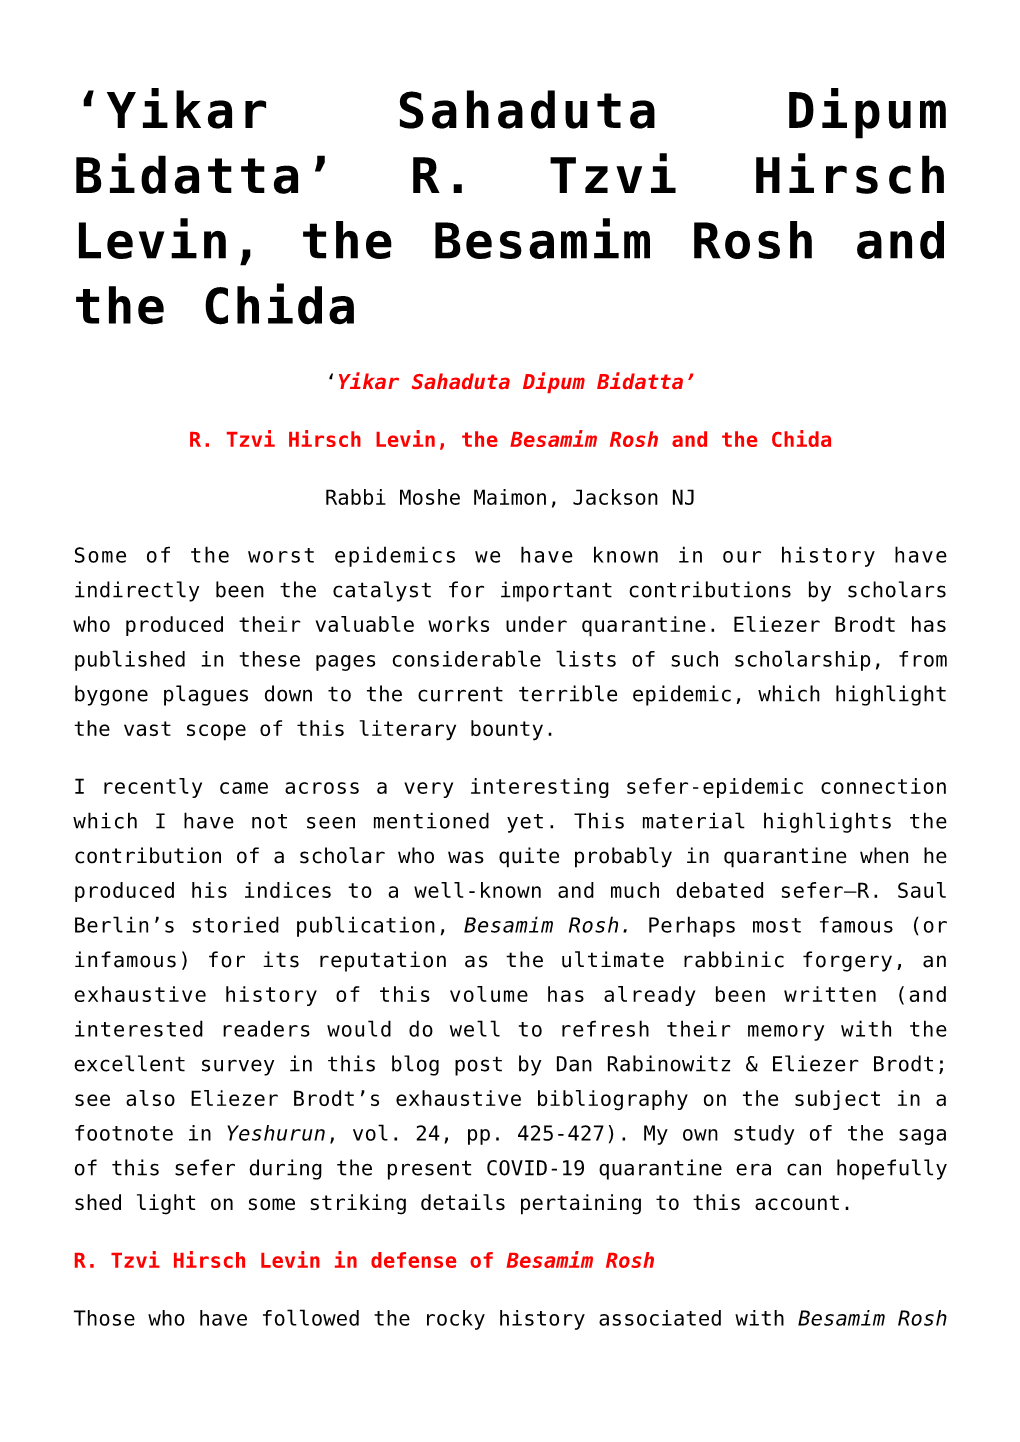 R. Tzvi Hirsch Levin, the Besamim Rosh and the Chida,A Gift for Rabbi